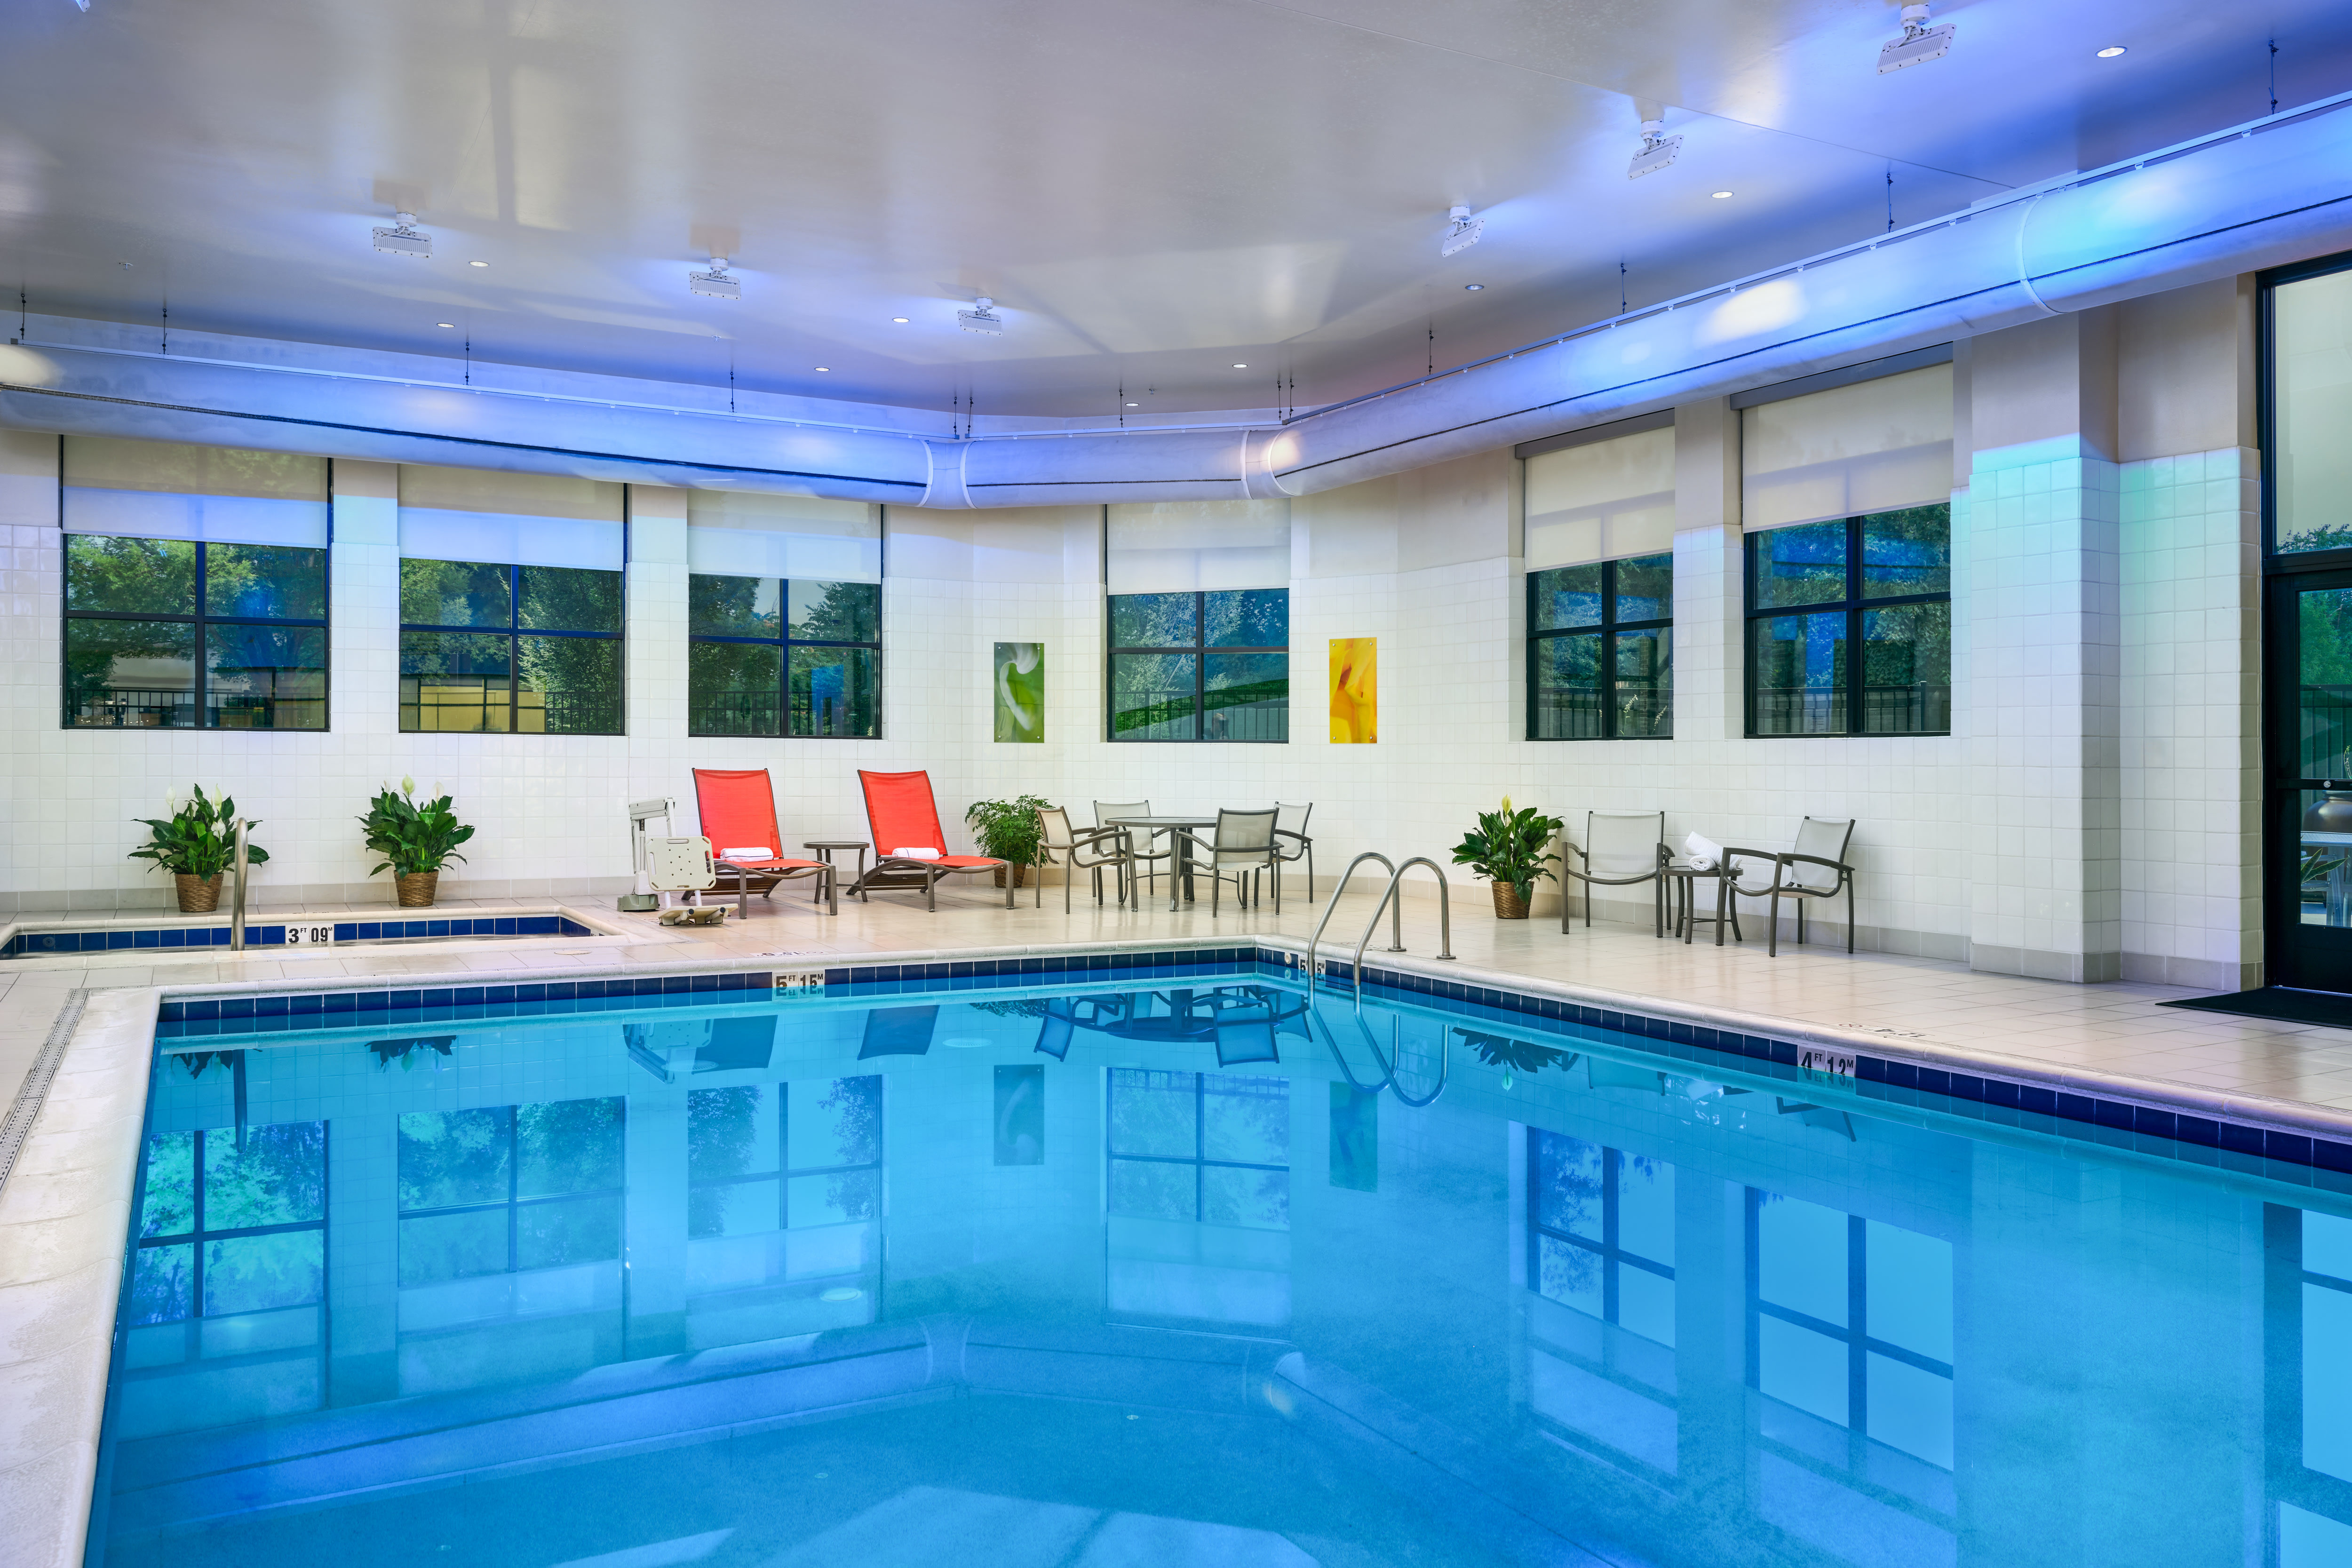 indoor pool, hot tub, lounge chairs, tables